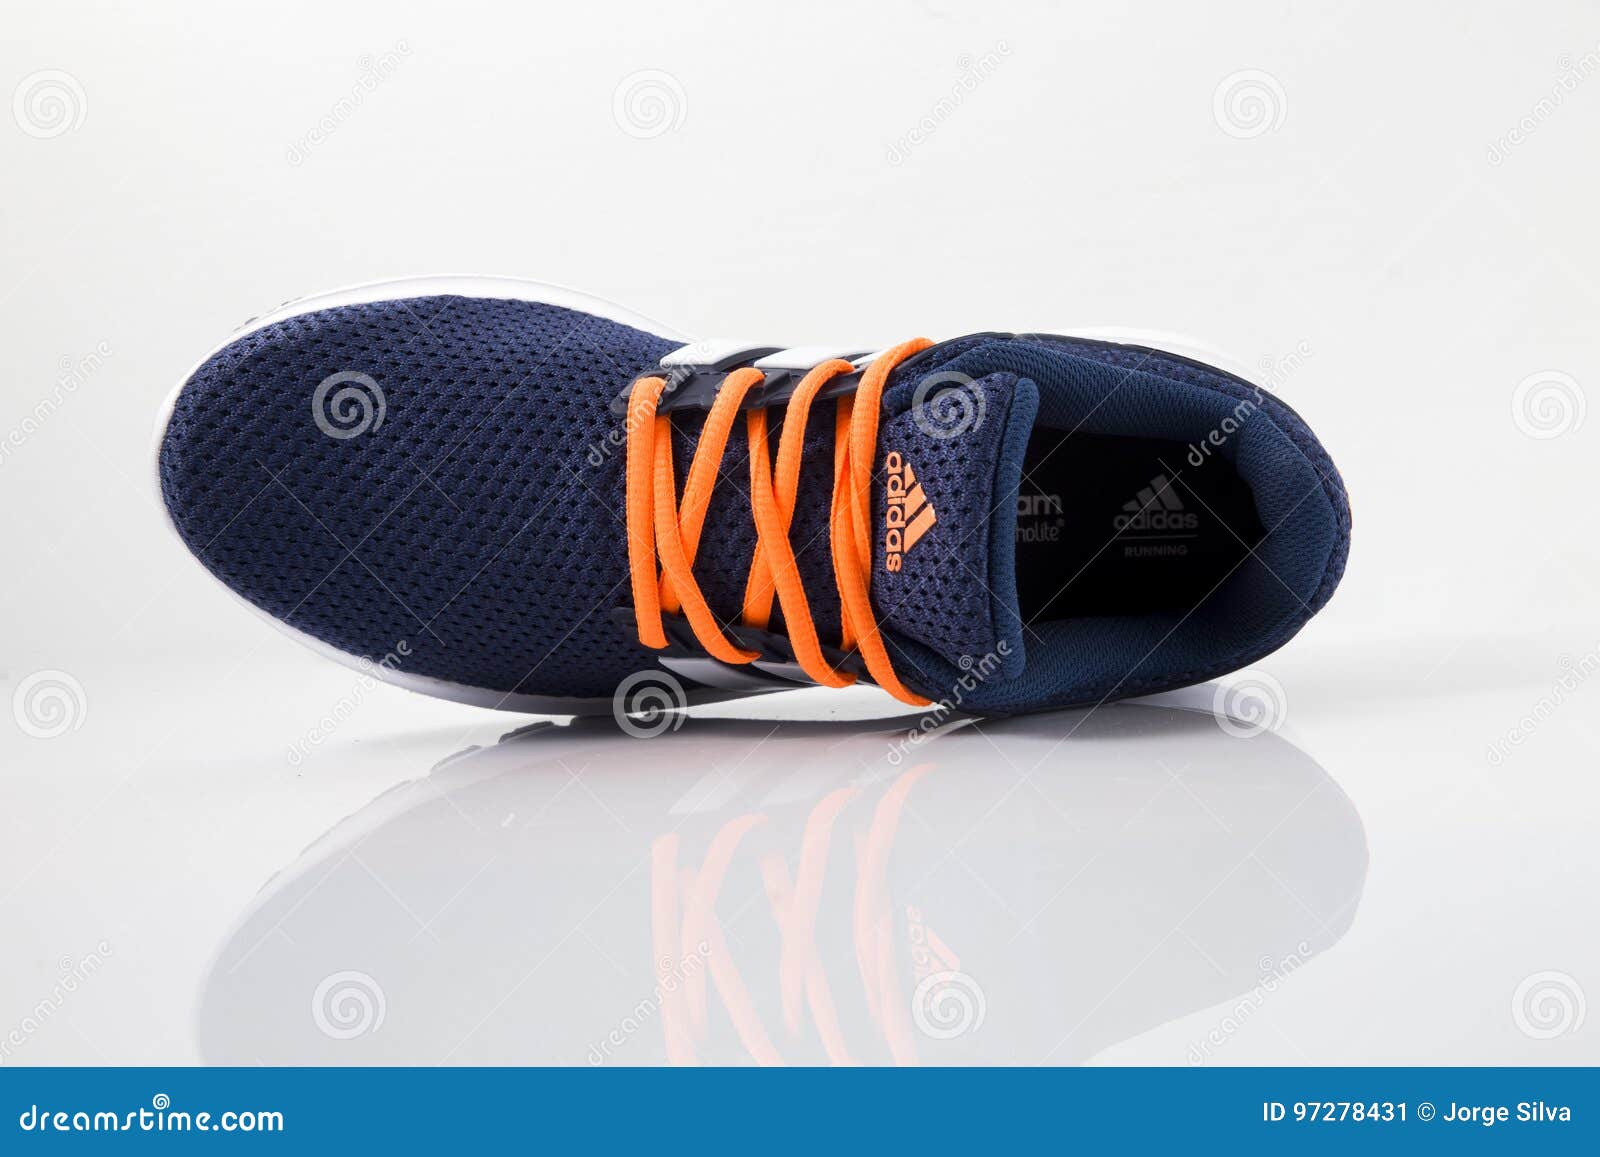 Adidas Classic Sneaker. Top View Editorial Photo - Image of boot ...